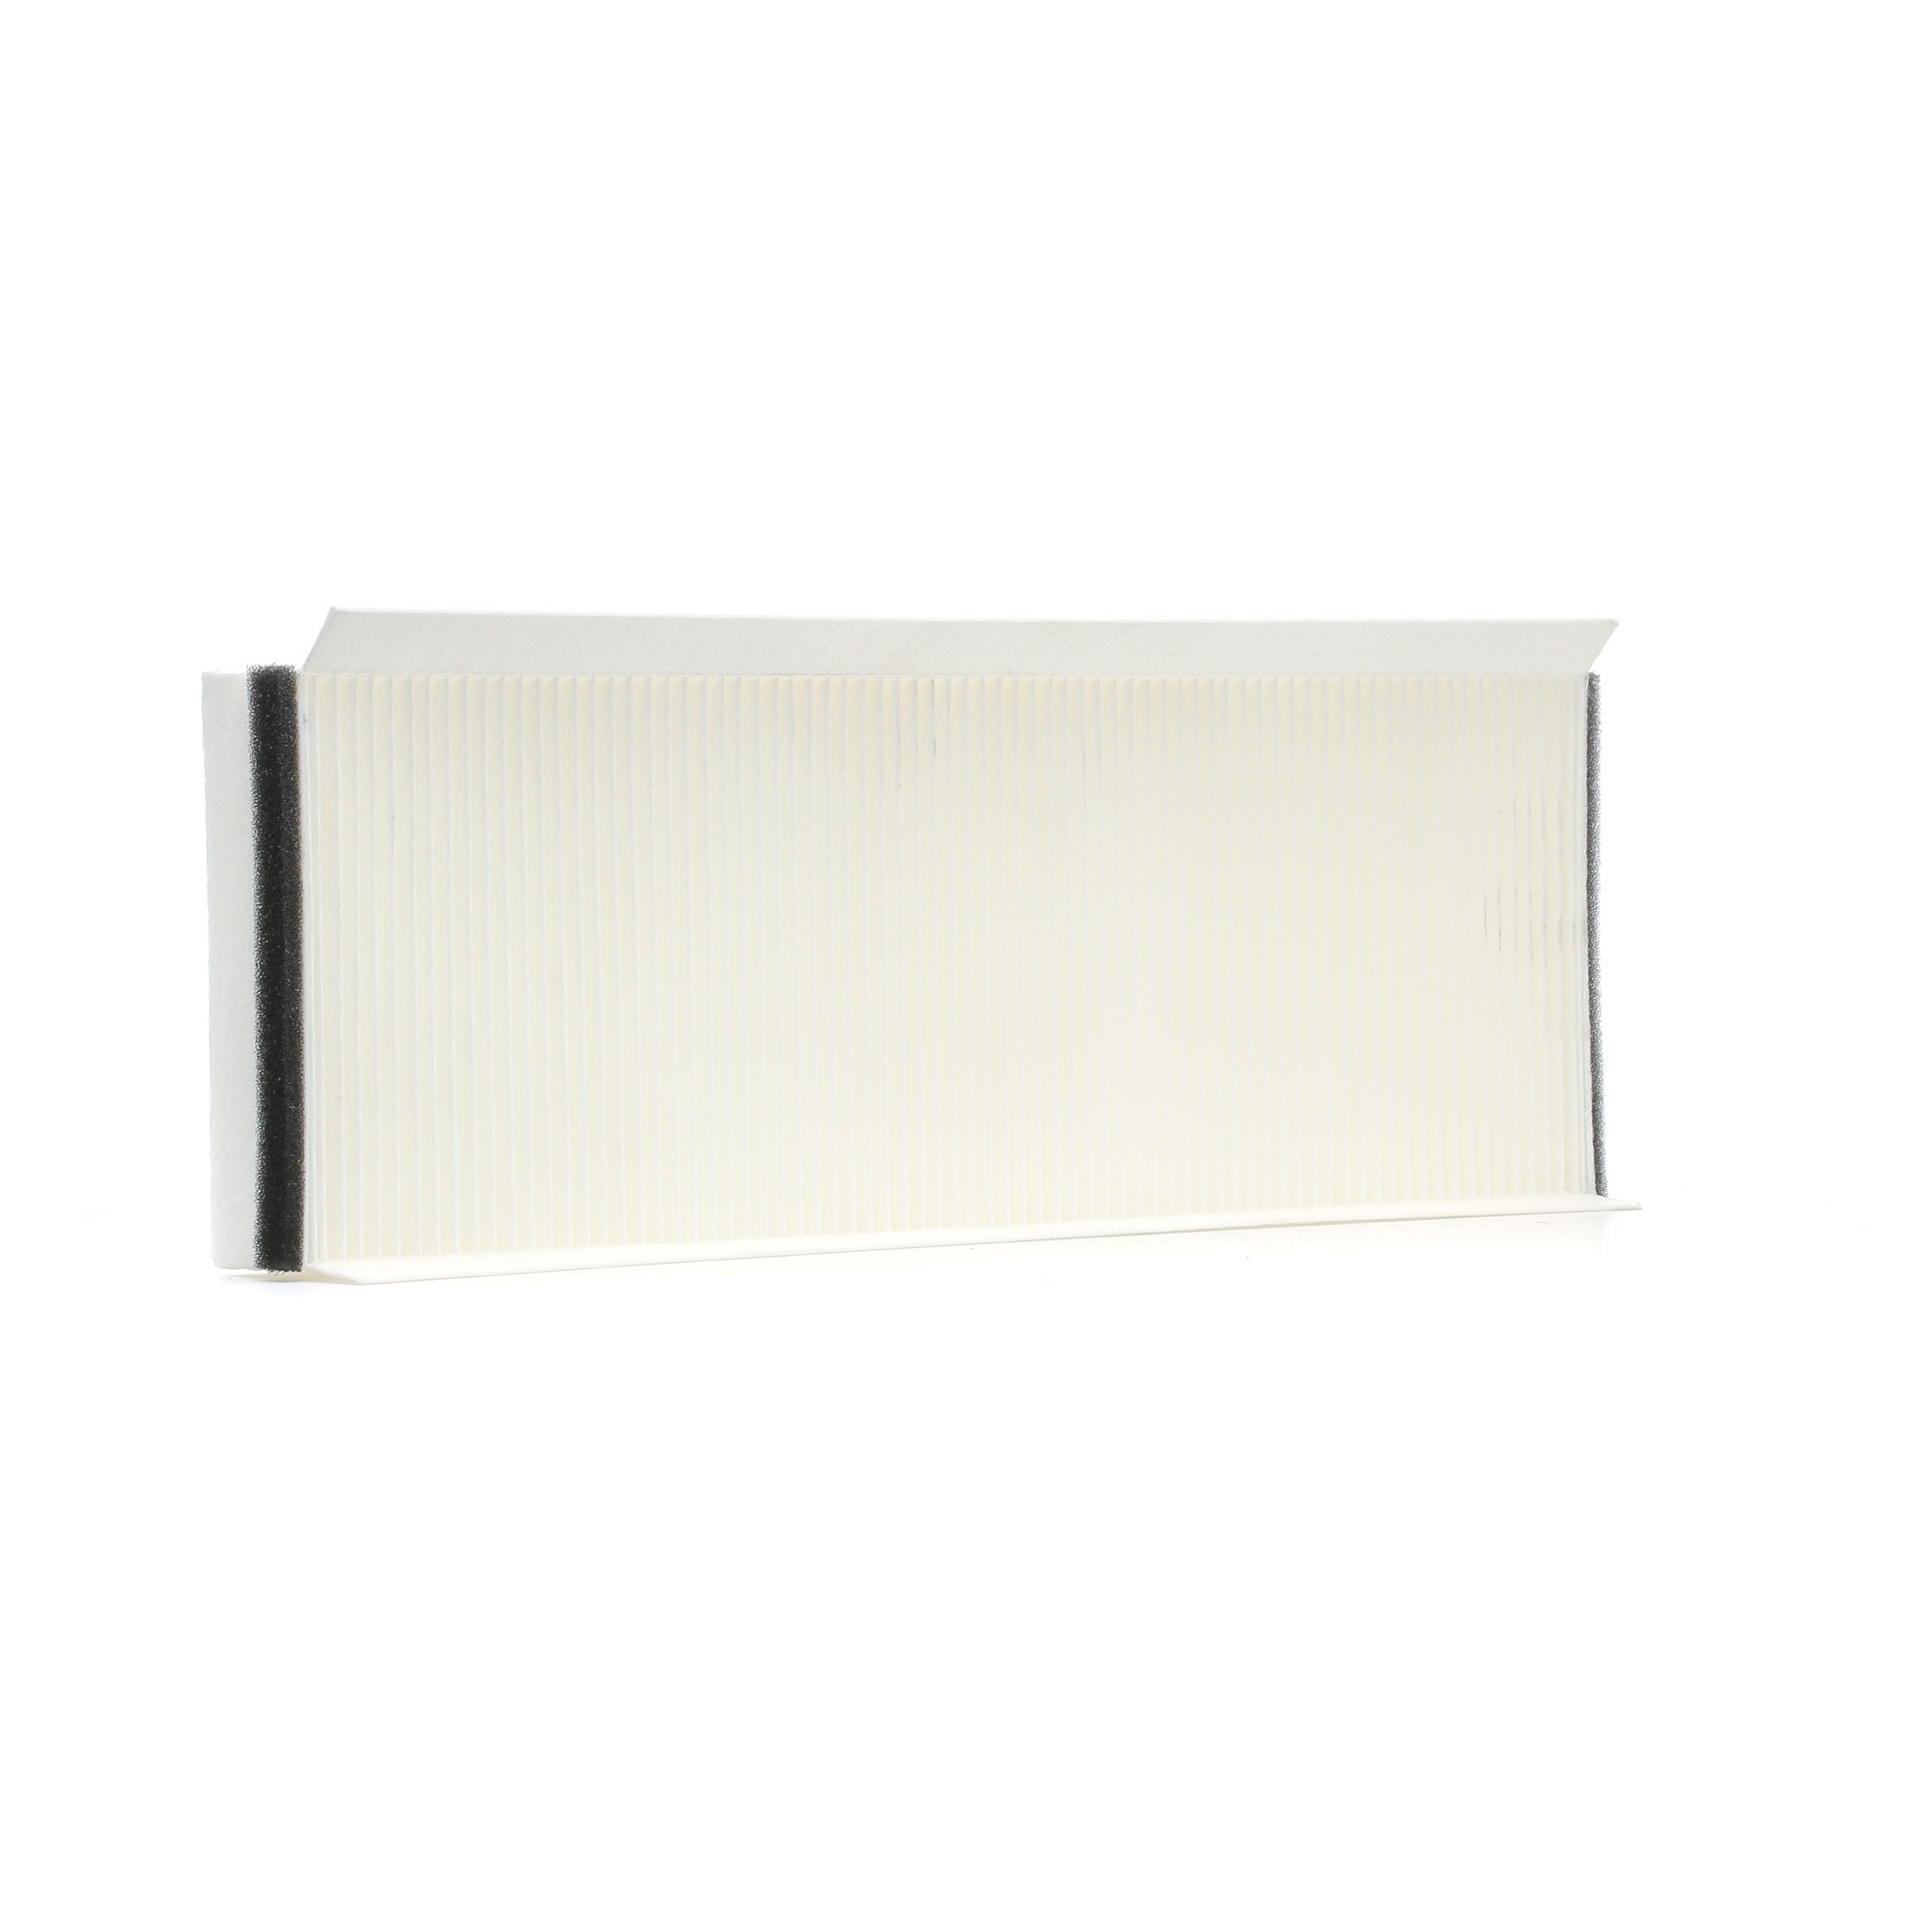 RIDEX Particulate Filter, 390 mm x 120 mm x 30 mm Width: 120mm, Height: 30mm, Length: 390mm Cabin filter 424I0298 buy